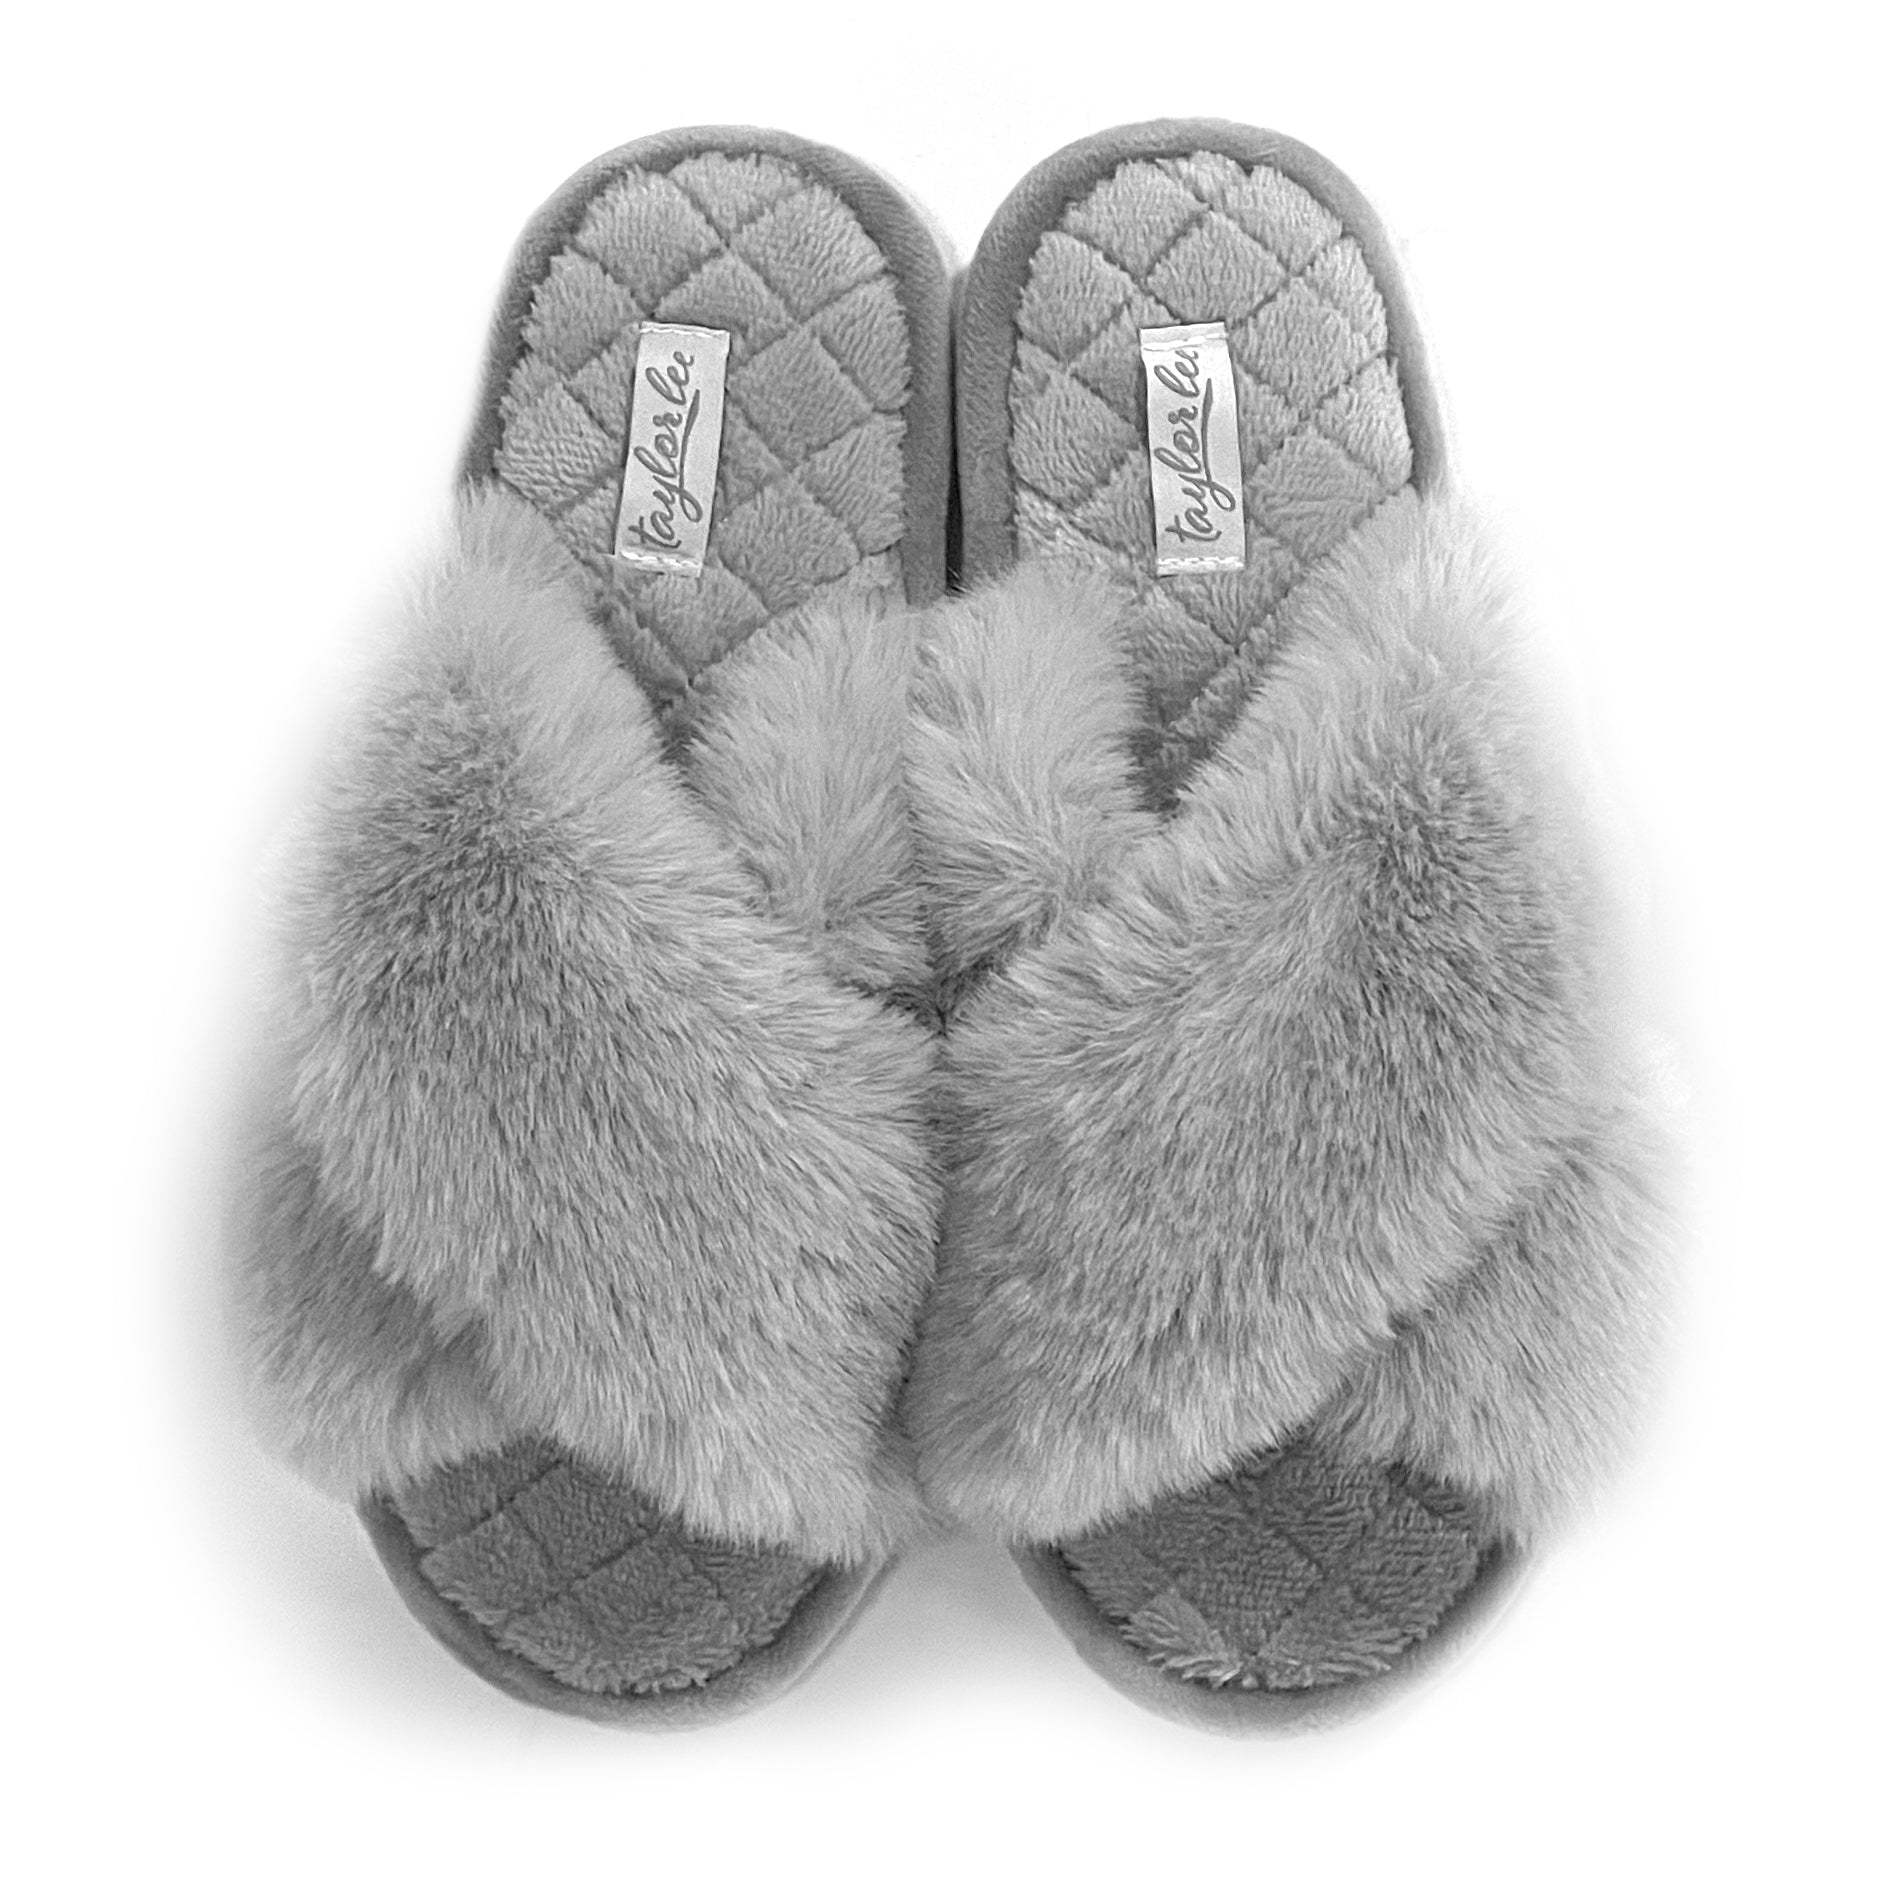 cozy and comfortable slippers footwear as a unique gift for sympathy basket